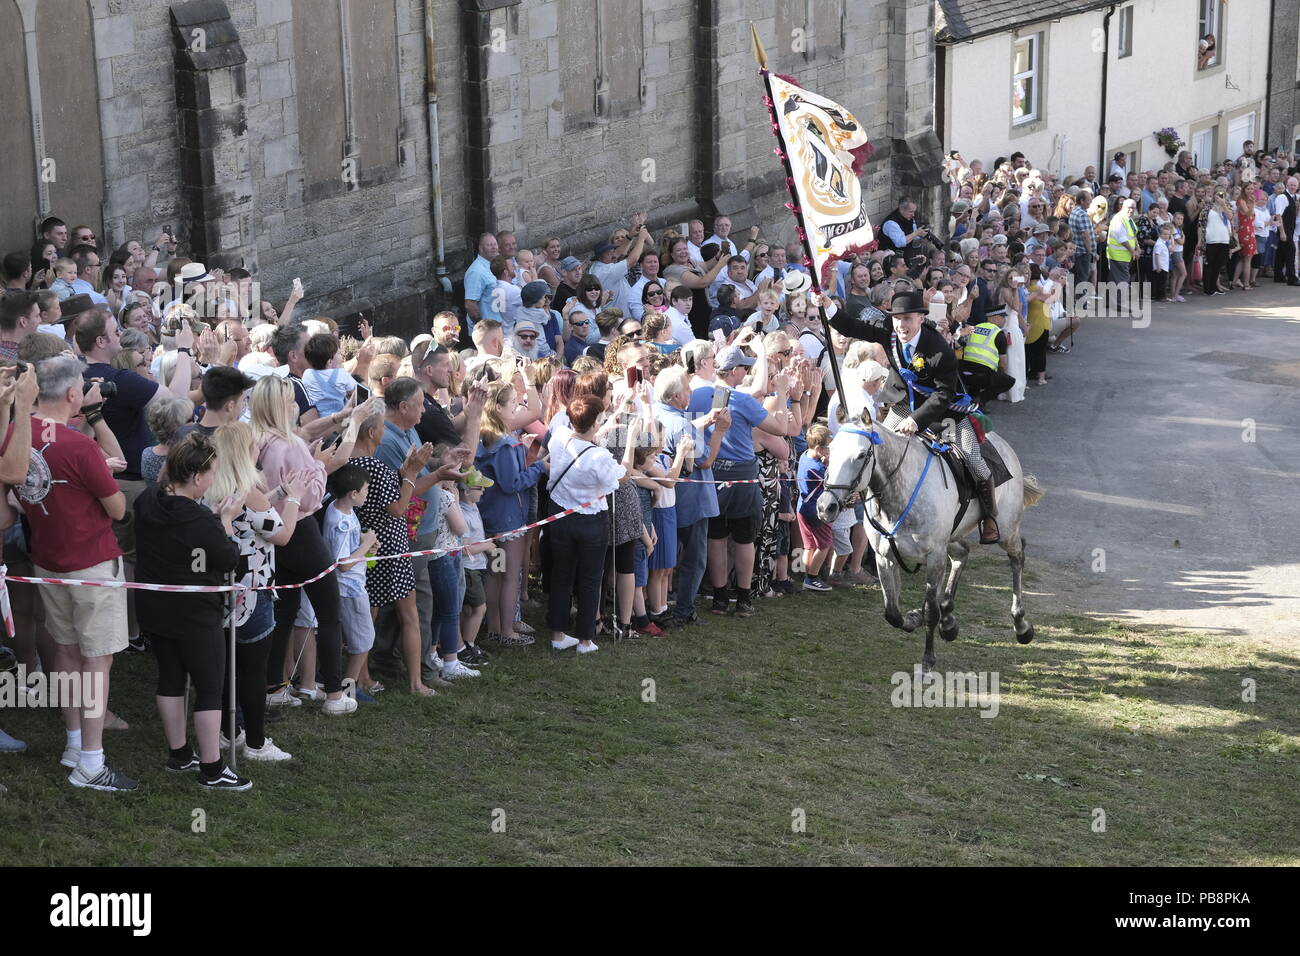 Langholm, Scotland, UK. 27th July, 2018.    Langholm Common Riding - 'Langholm's Great Day' Langholm Cornet Iain Little gallops up the Kirk Wynd ahead of his mounted supporters in Langholm, 'The Muckle Toon' has seen tradition upheld for over 250 years with the Annual Langholm Common Riding which takes place every year on the last Friday in July, This year falling on Friday 27th.   Credit: Rob Gray/Alamy Live News Stock Photo